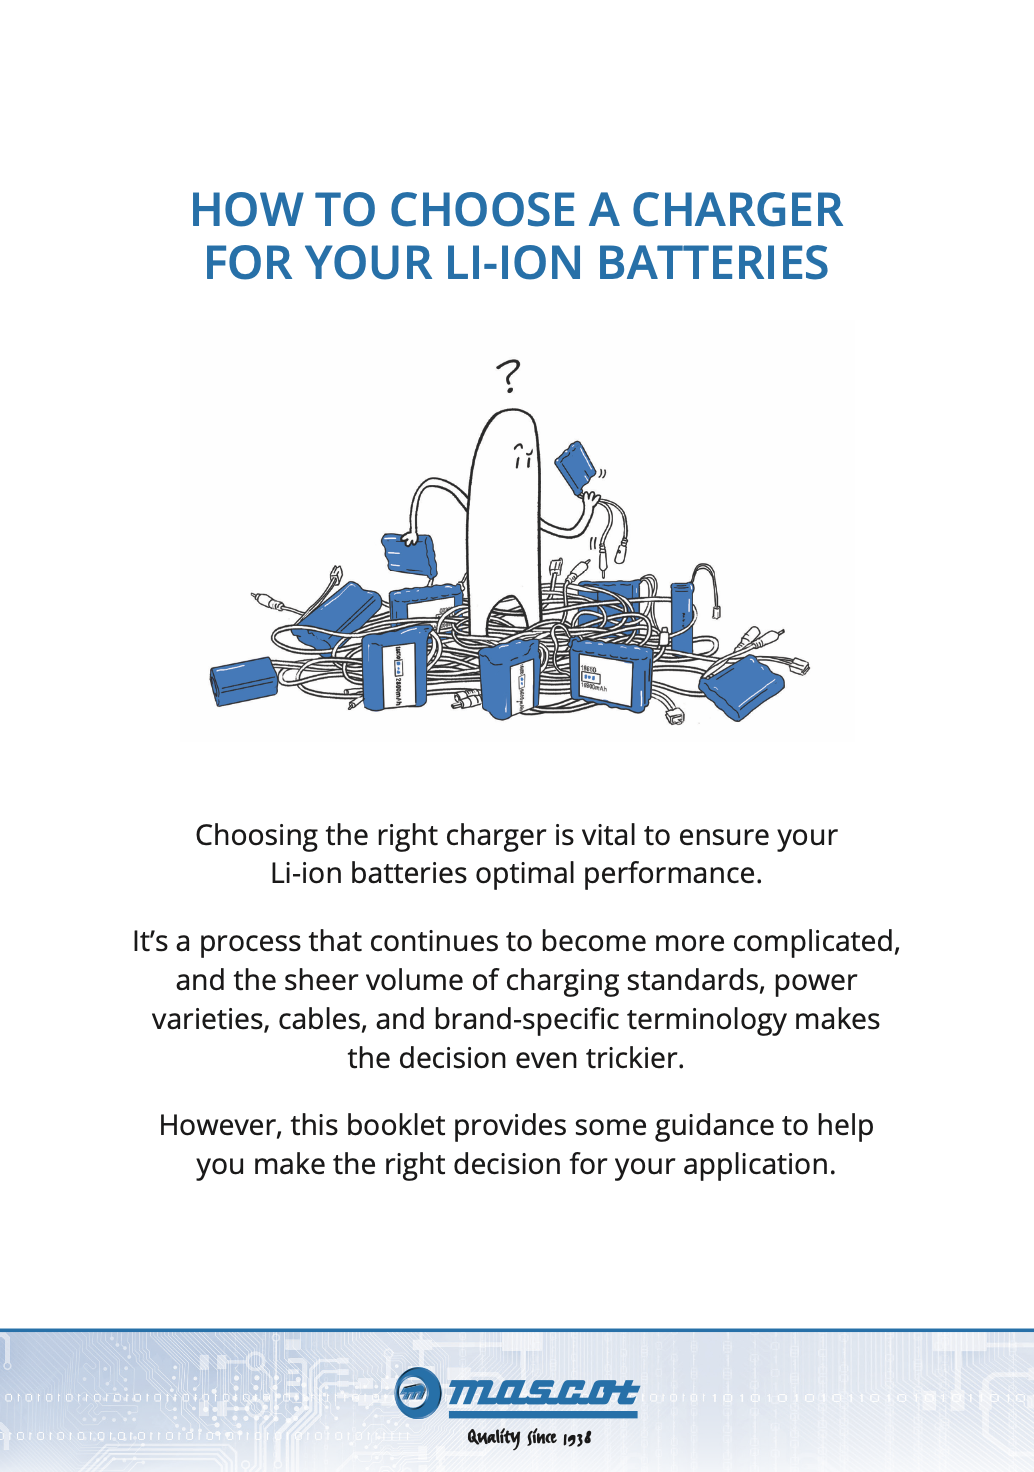 How to choose a charger for your Li-ion batteries?